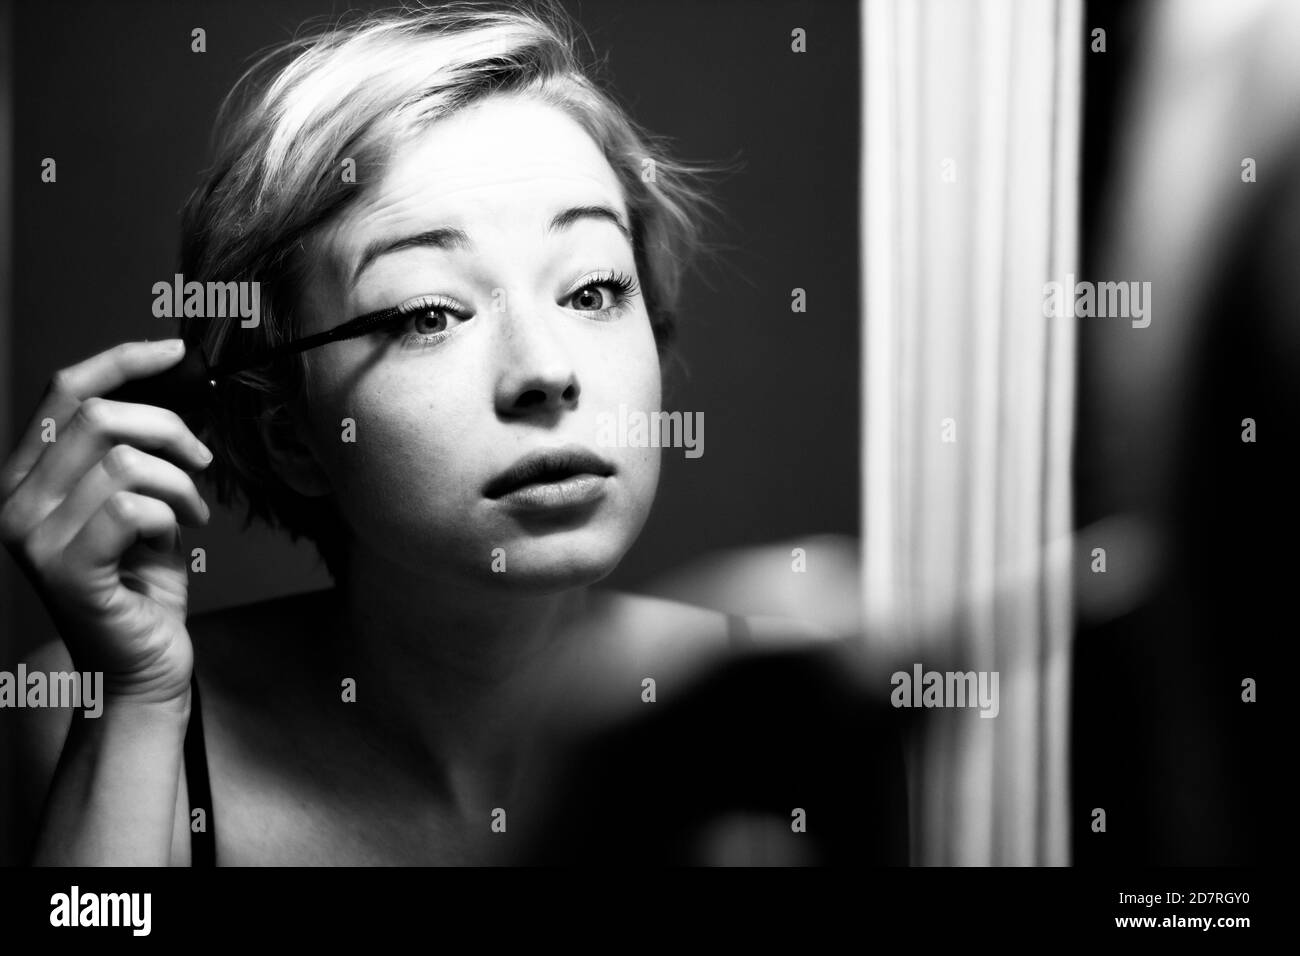 Woman getting ready for work doing morning makeup routine applying mascara in bathroom mirror at home. Beautiful caucasian girl applying eye make-up Stock Photo